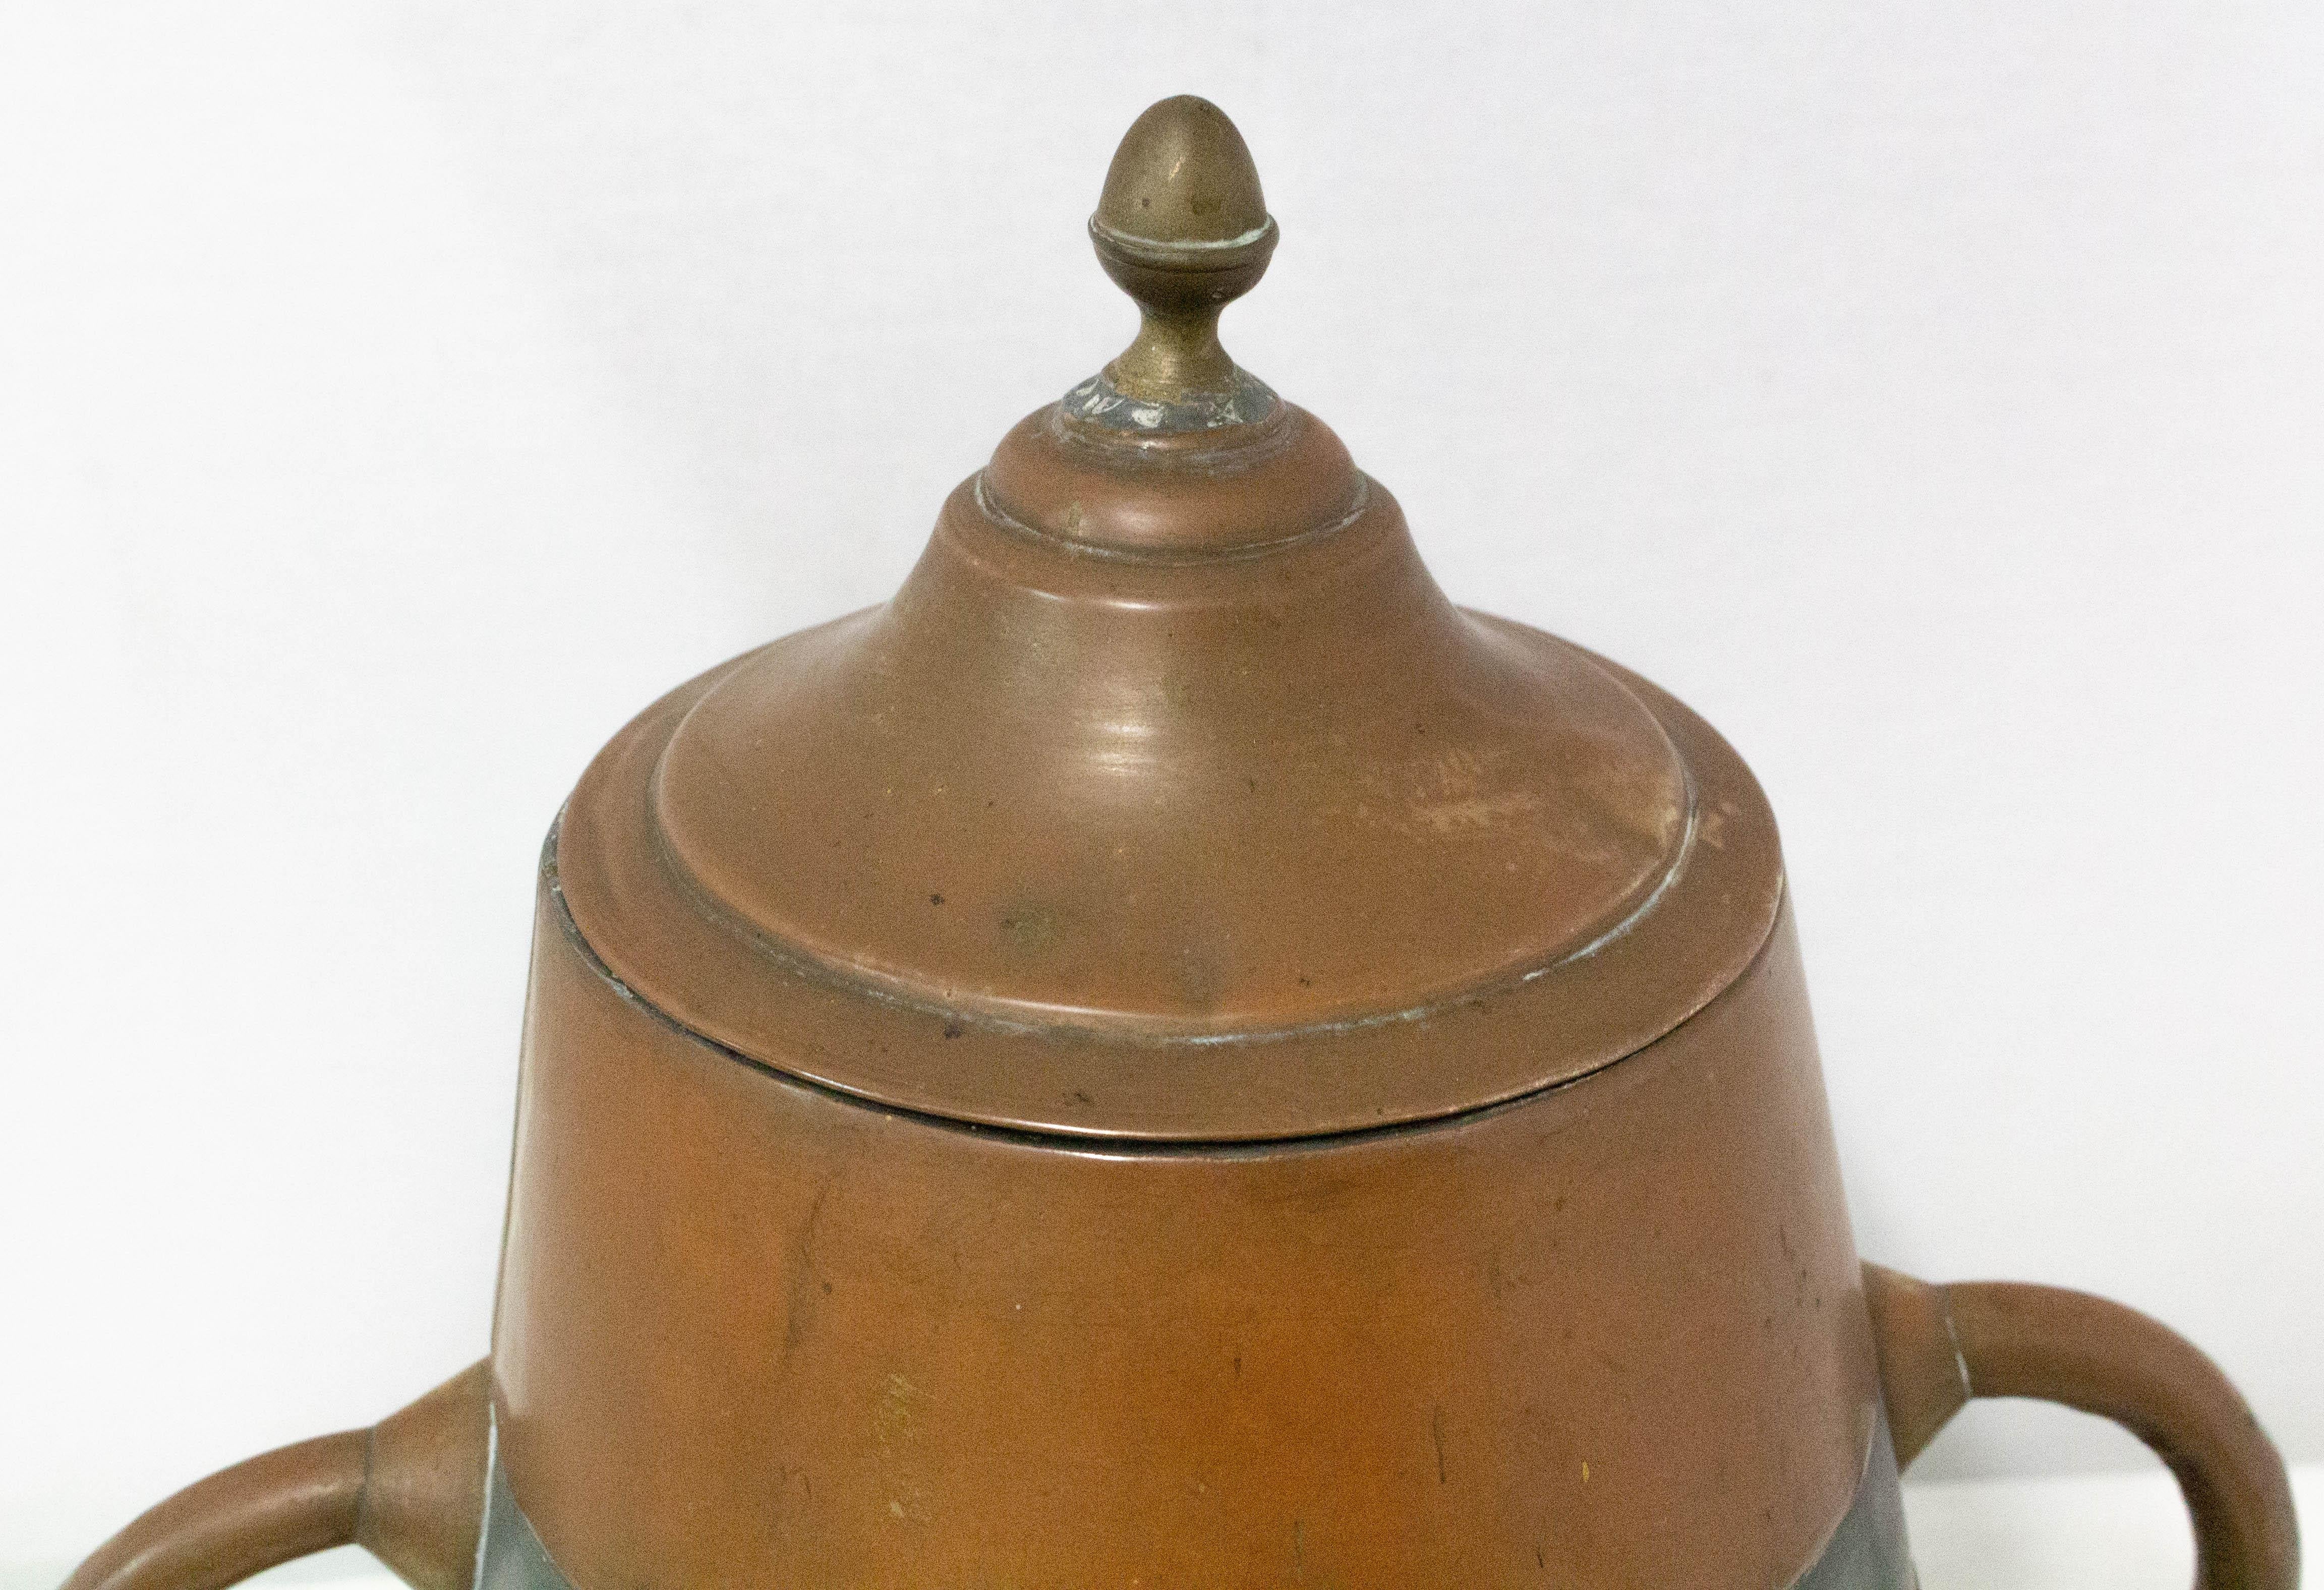 Decorative French Basque Water Holder Zinc and Copper Herrade, 19th Century For Sale 1